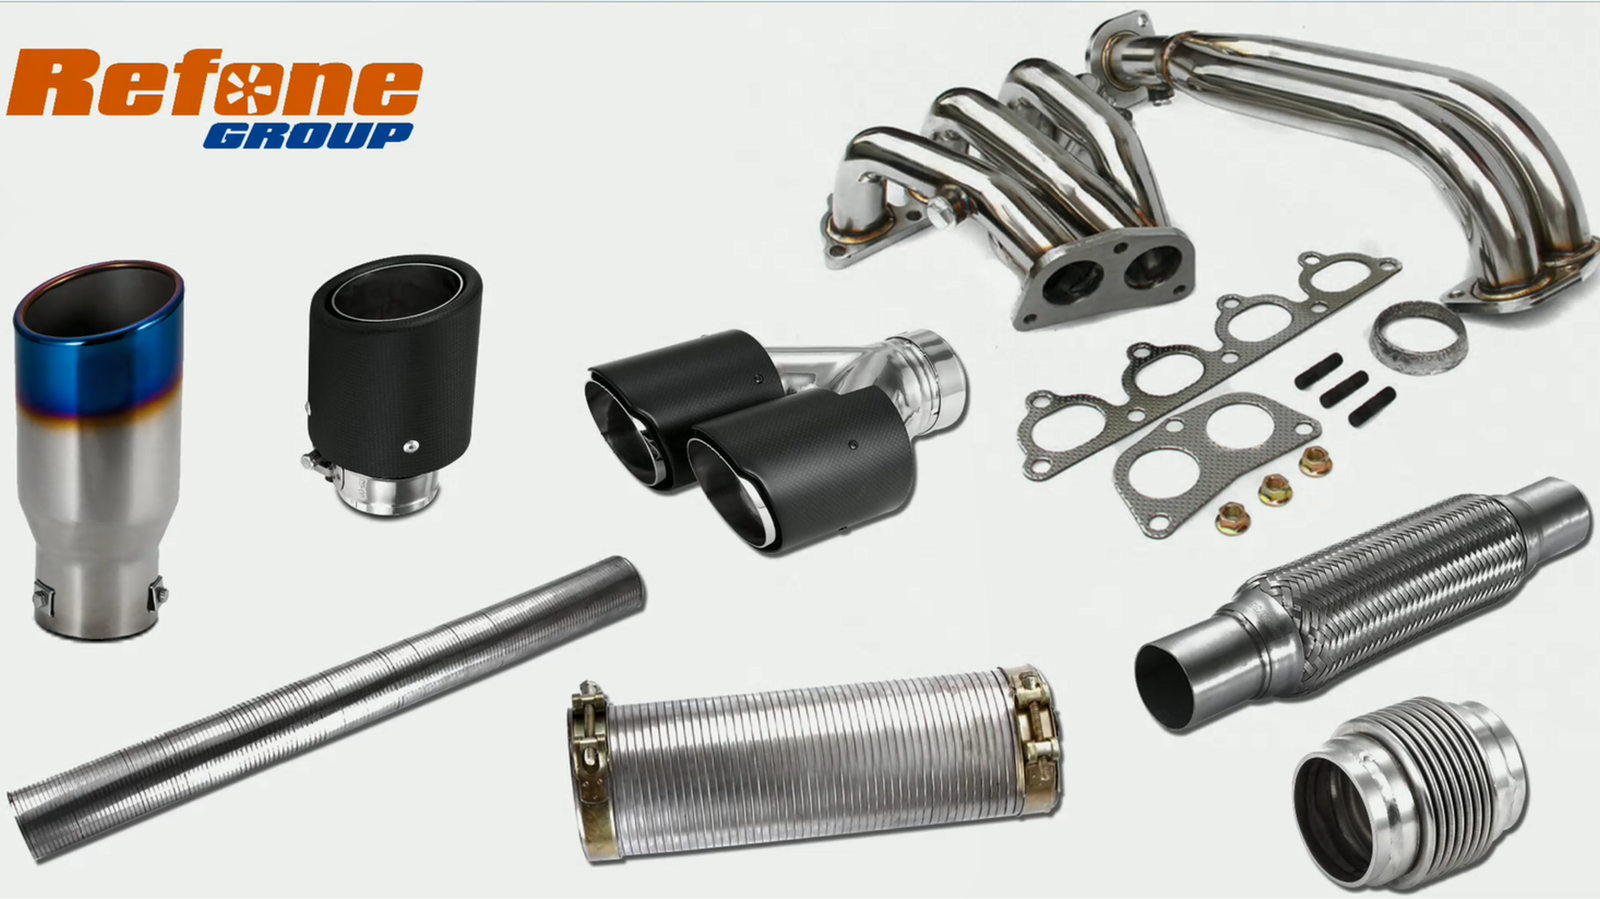 Refone New Products Release---exhaust parts